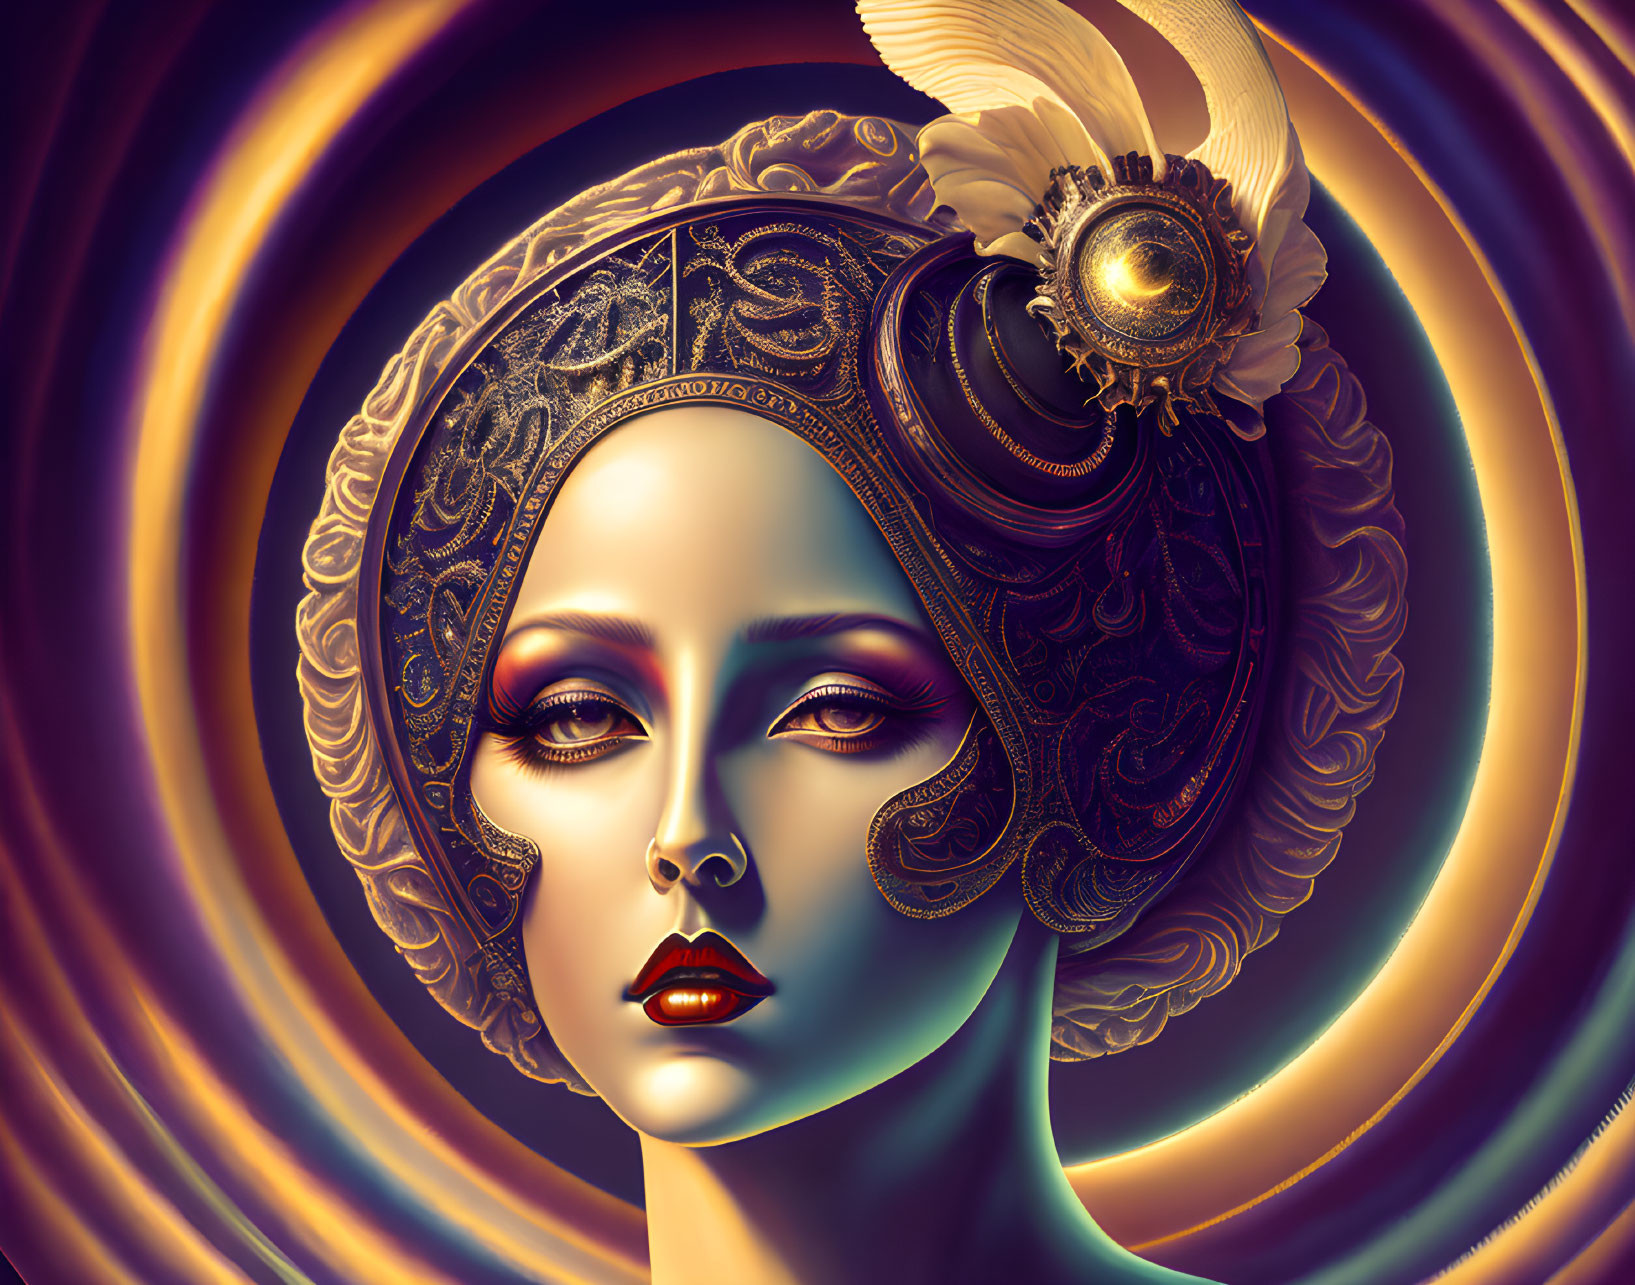 Detailed digital portrait of woman with ornate headdress and feather against golden spiral backdrop